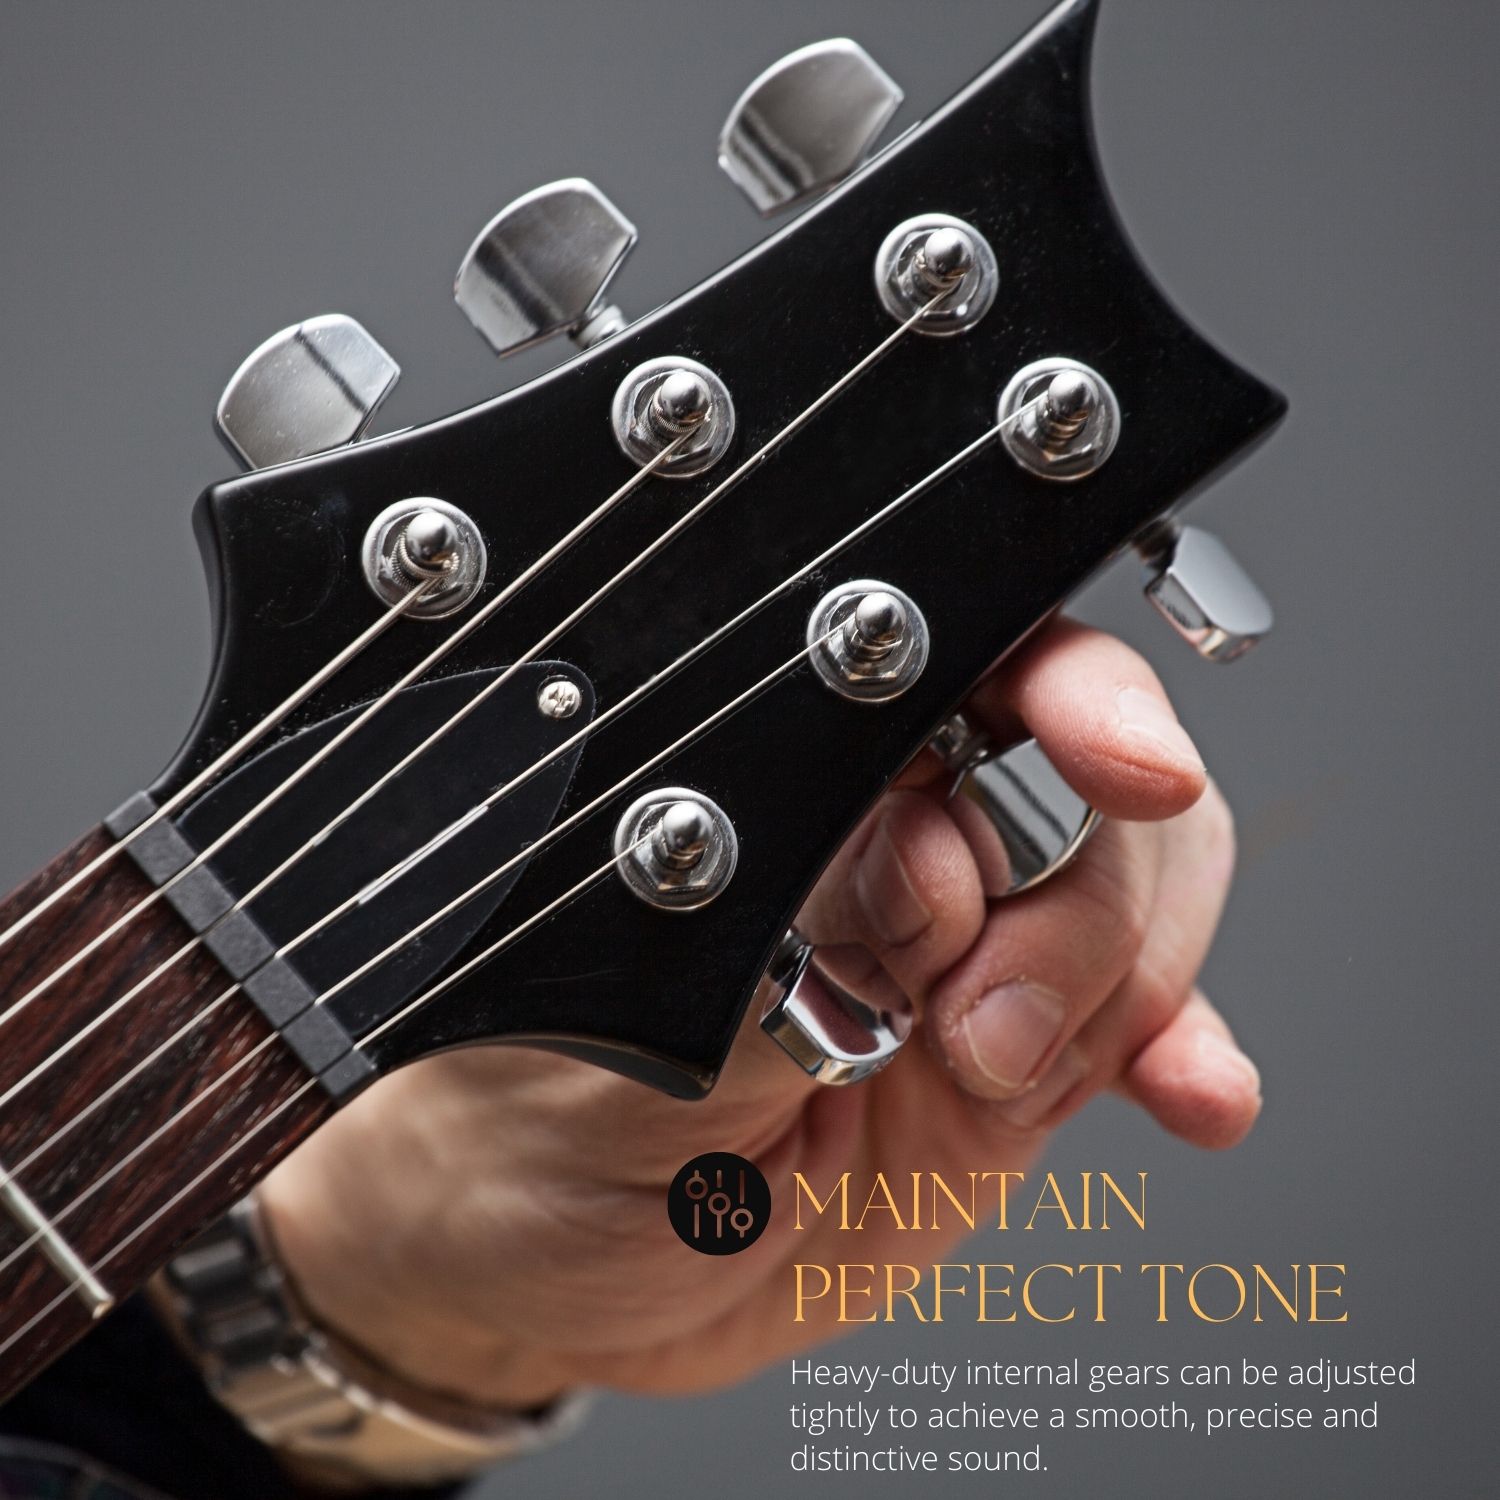 Easy to Install - No special skills are needed. It comes with an innovative locking mechanism with washers and bushings to let you quickly replace your worn-out guitar tuner machines.